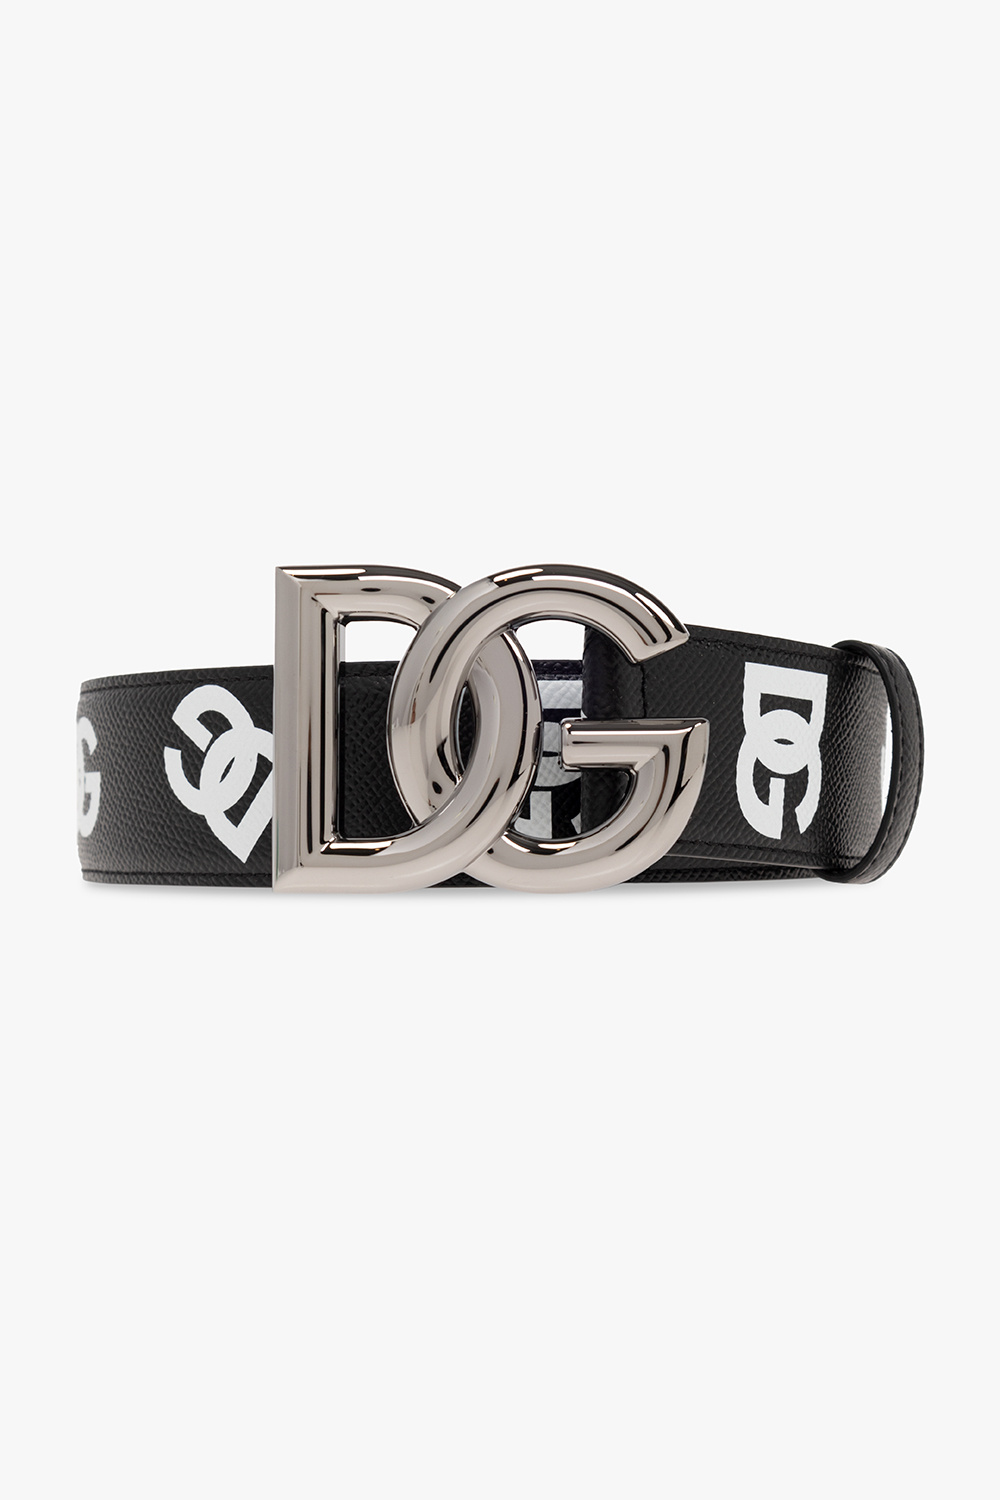 dolce lace & Gabbana two-tone sneakers Leather belt with logo